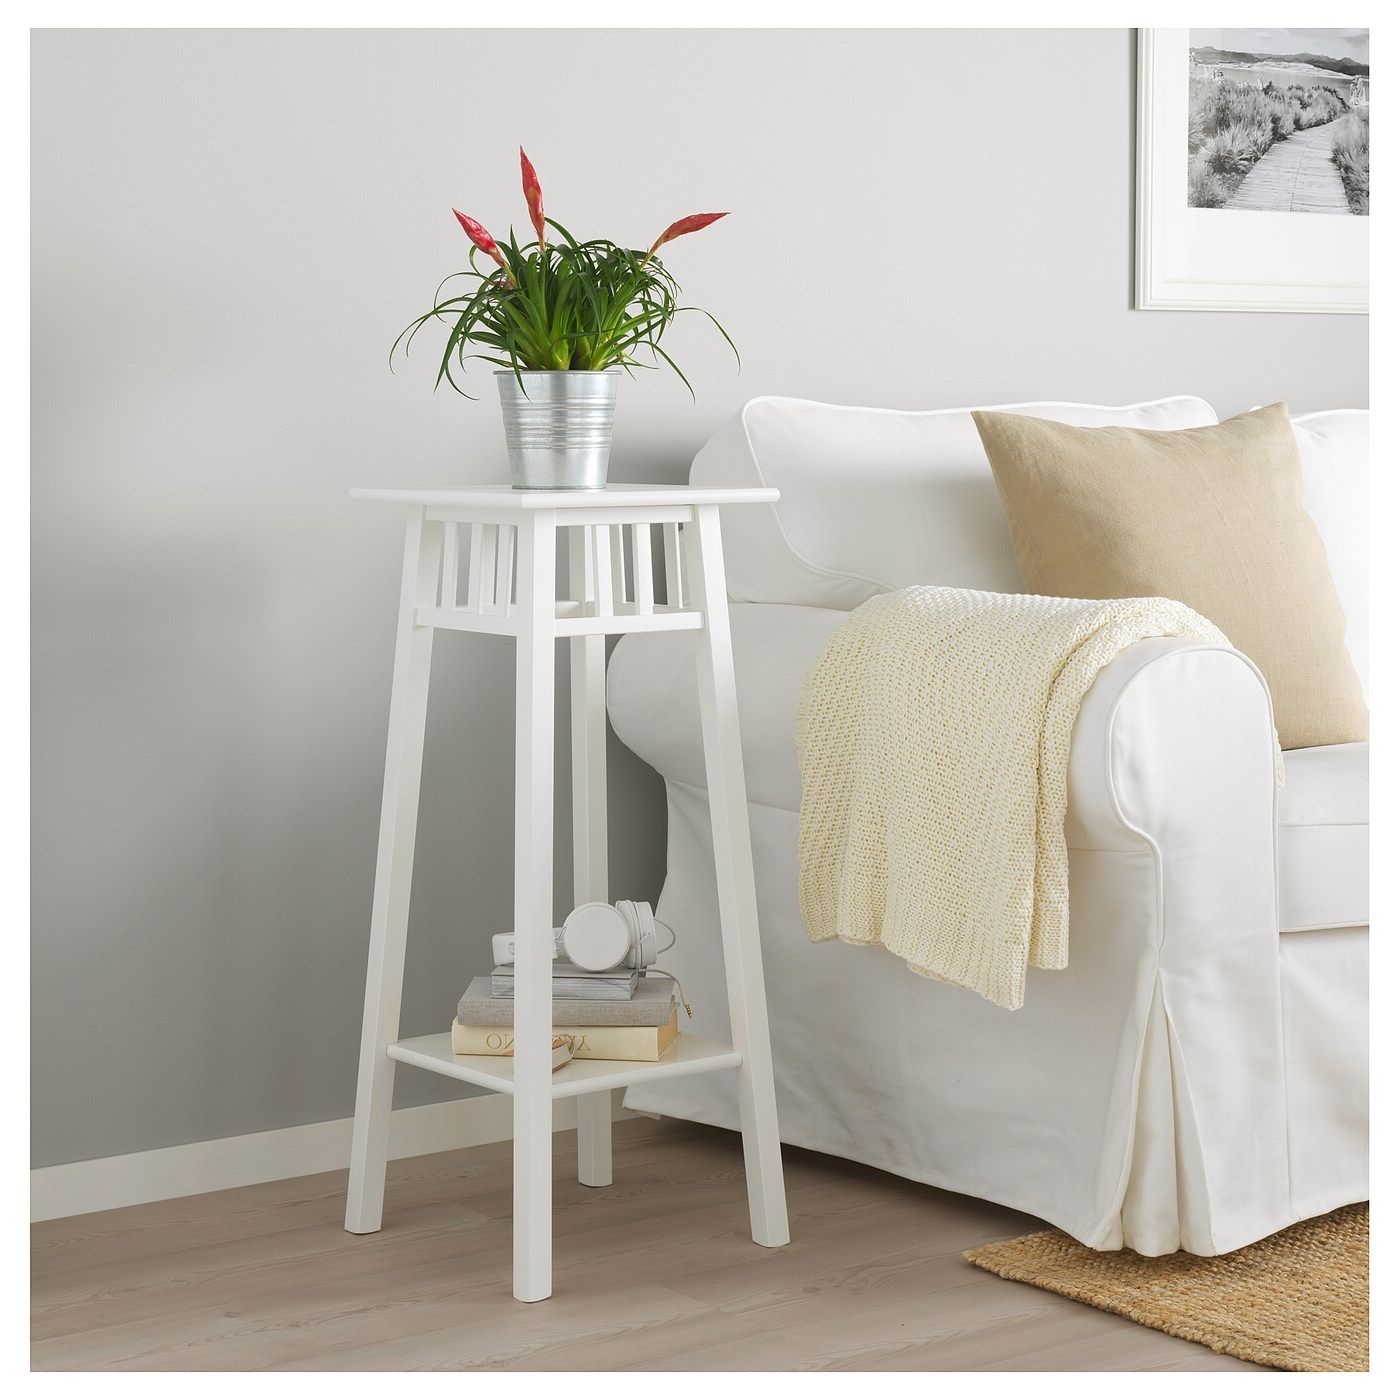 Famous Lantliv Plant Stand, White, 78 Cm – Ikea Ireland Inside White Plant Stands (View 8 of 15)